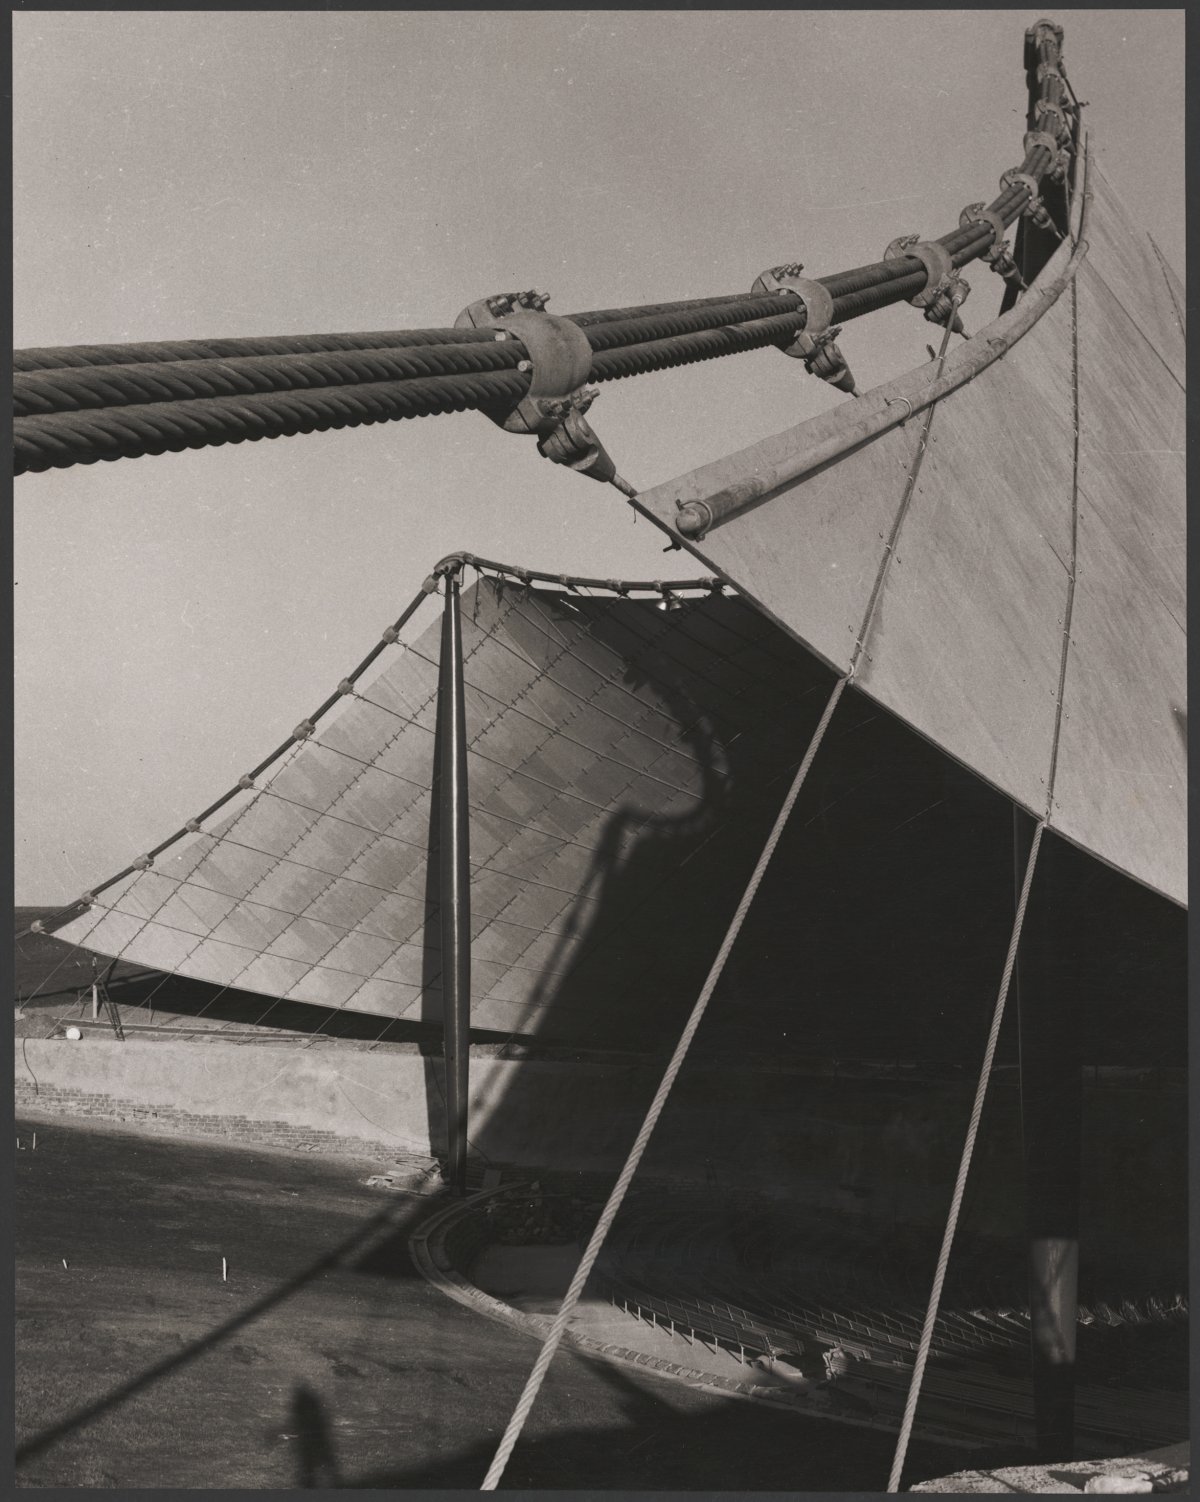 An abstract photograph of the Sidney Myer Music Bowl showing the steel cable supports holding up the sail like roof